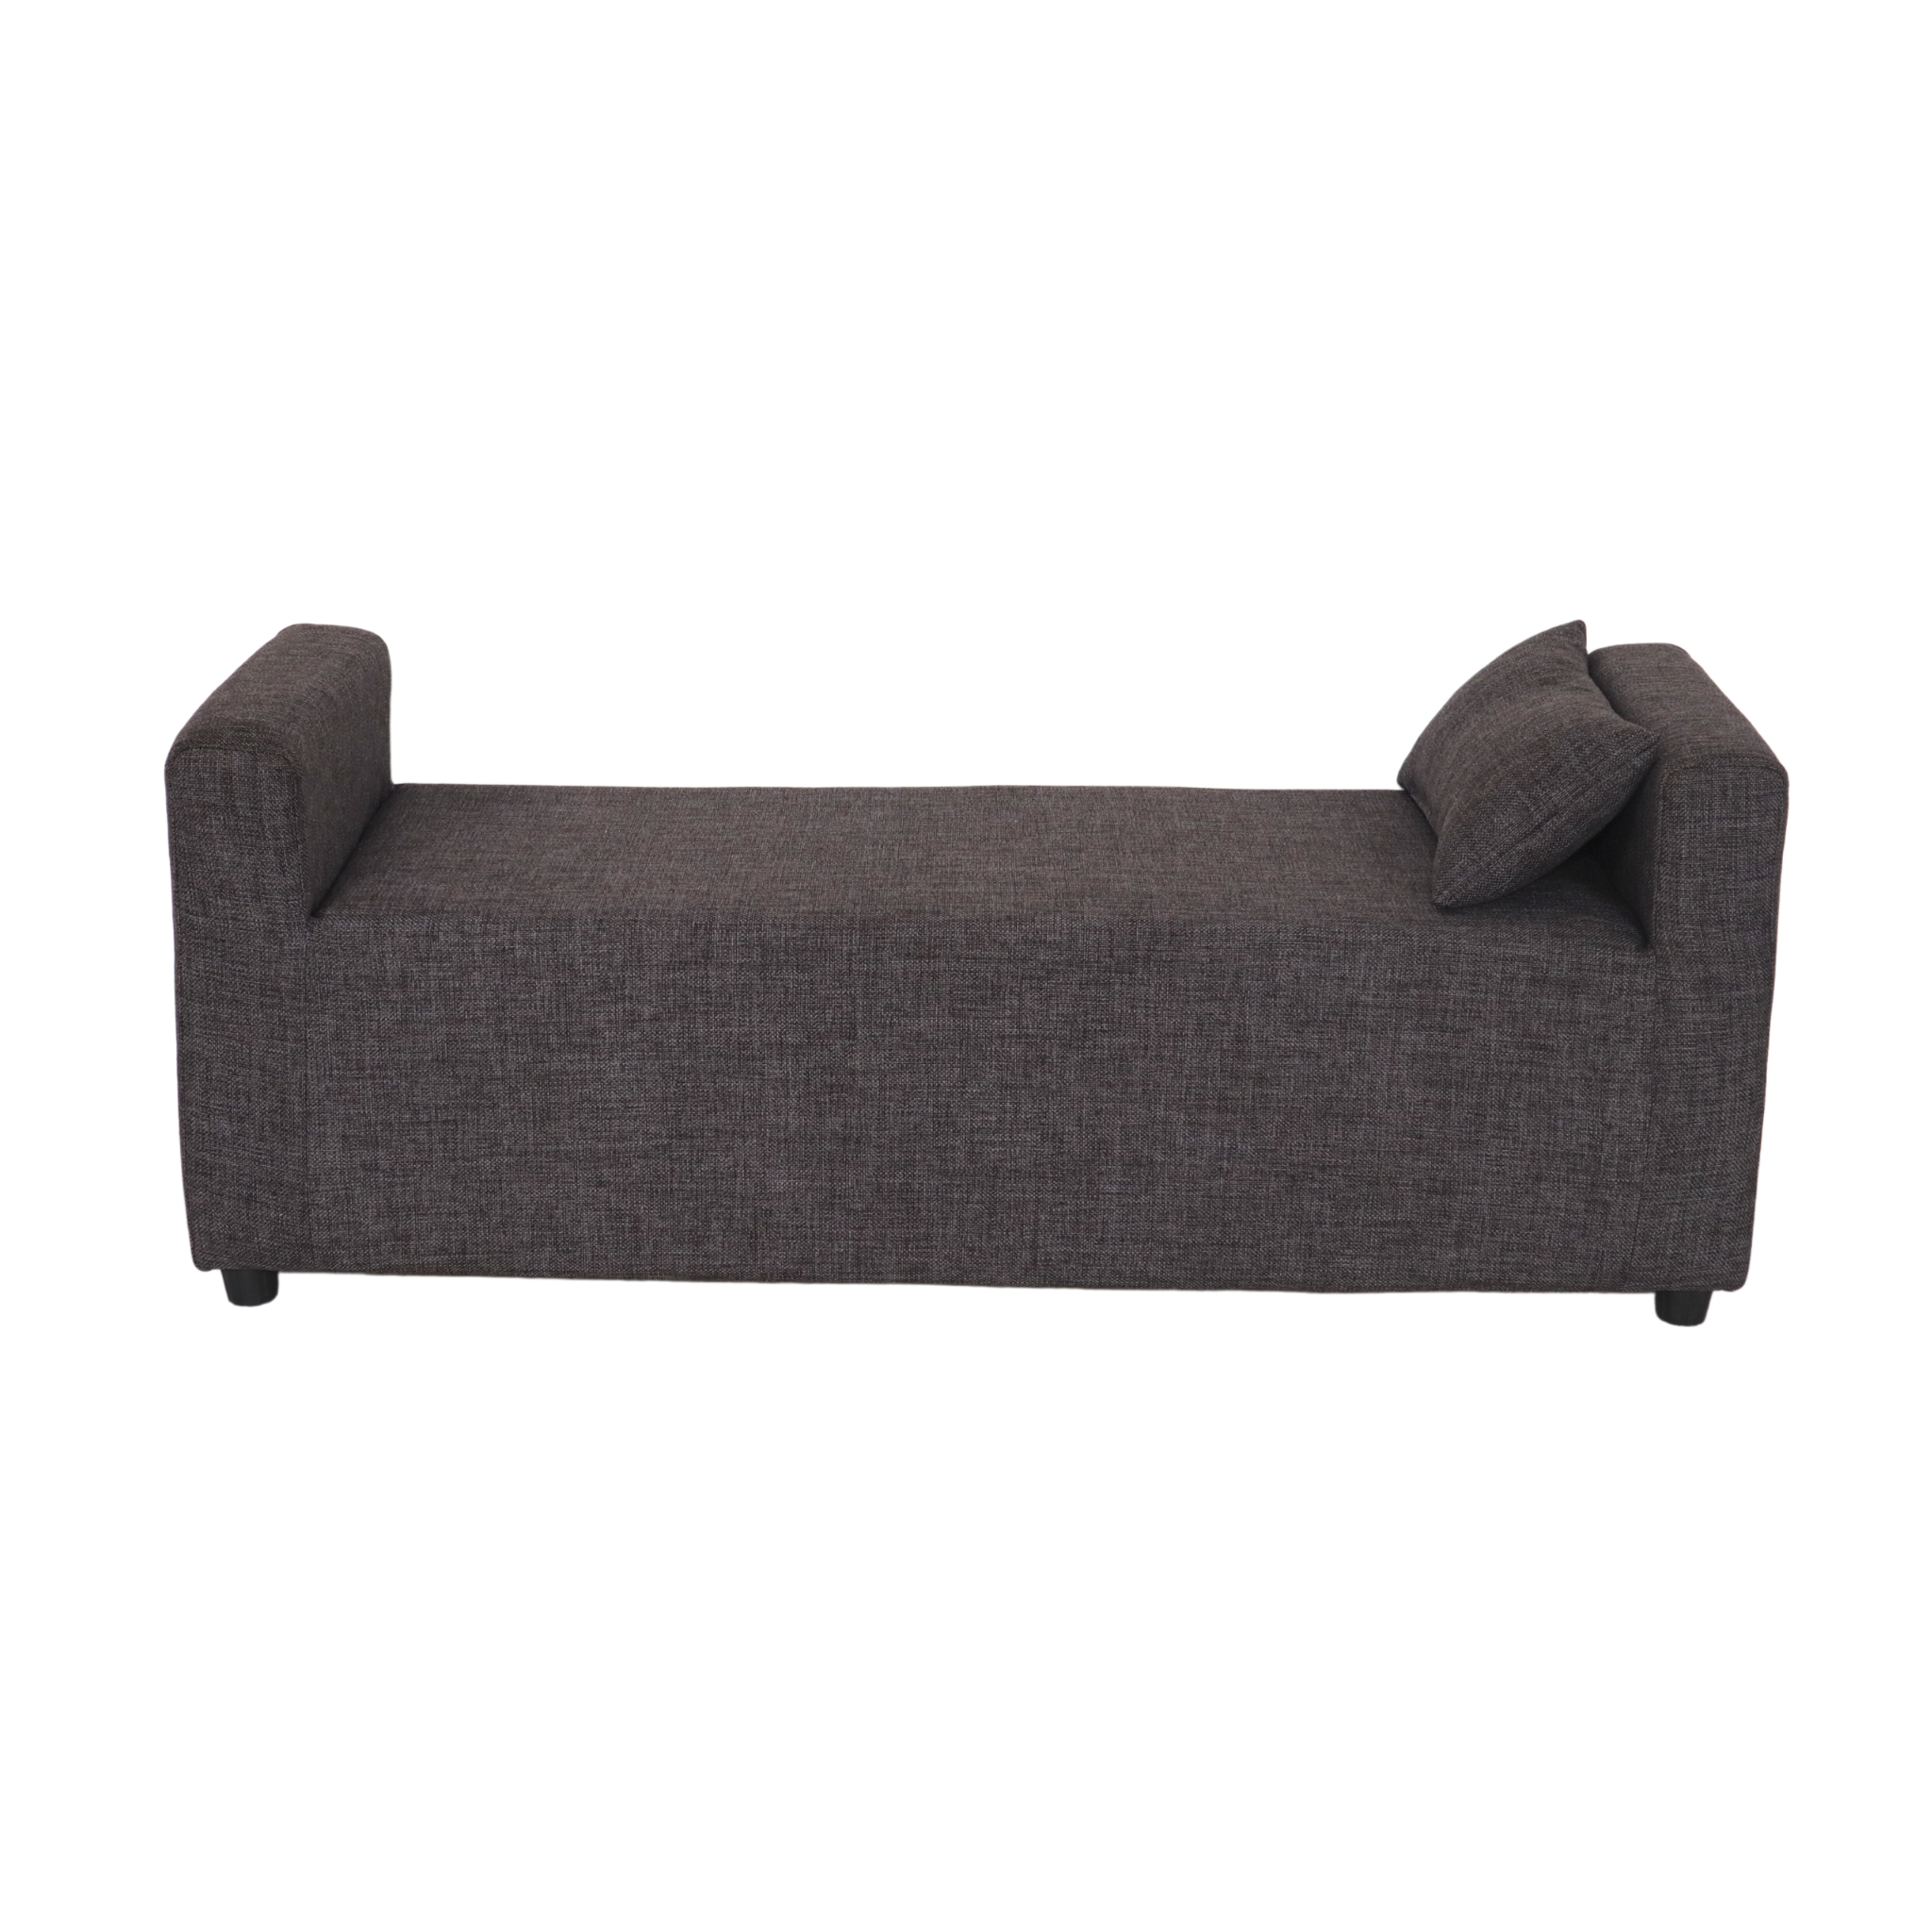 FALCON 3 Seater Bench (Leather Sofa) AF Home